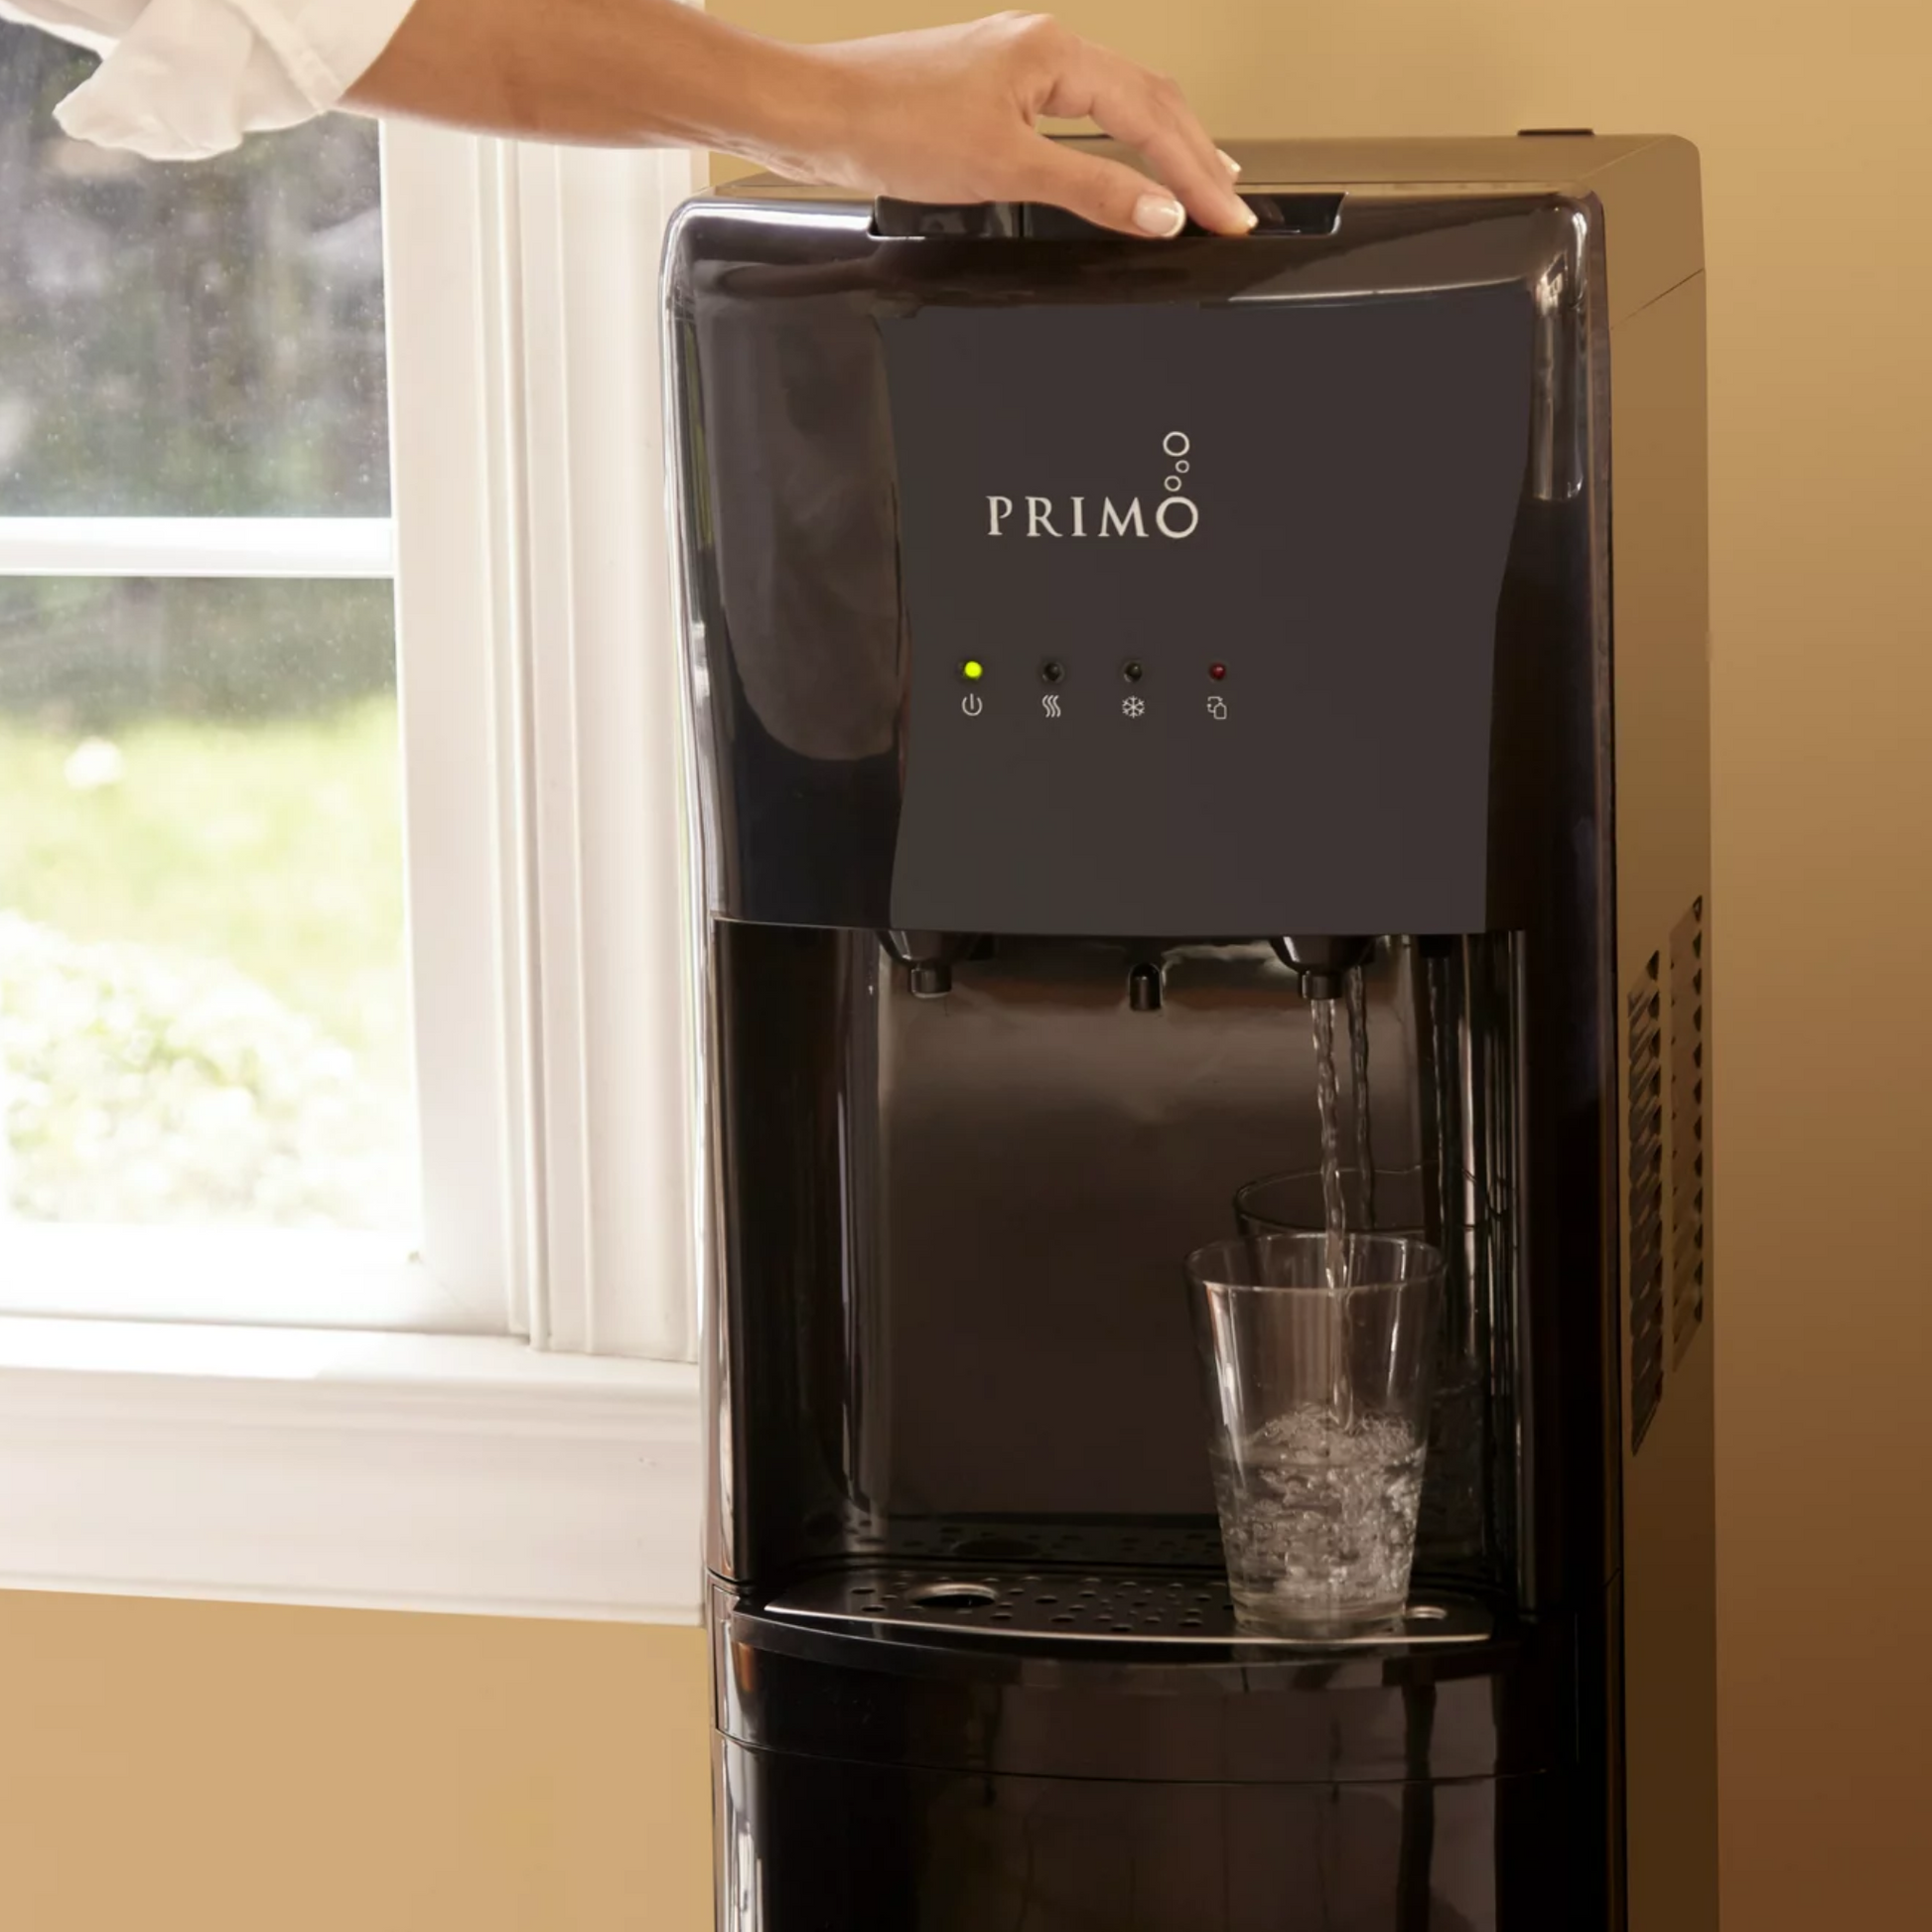 Bottom Loading Primo Water Dispenser in Black with Hot and Cold Settings